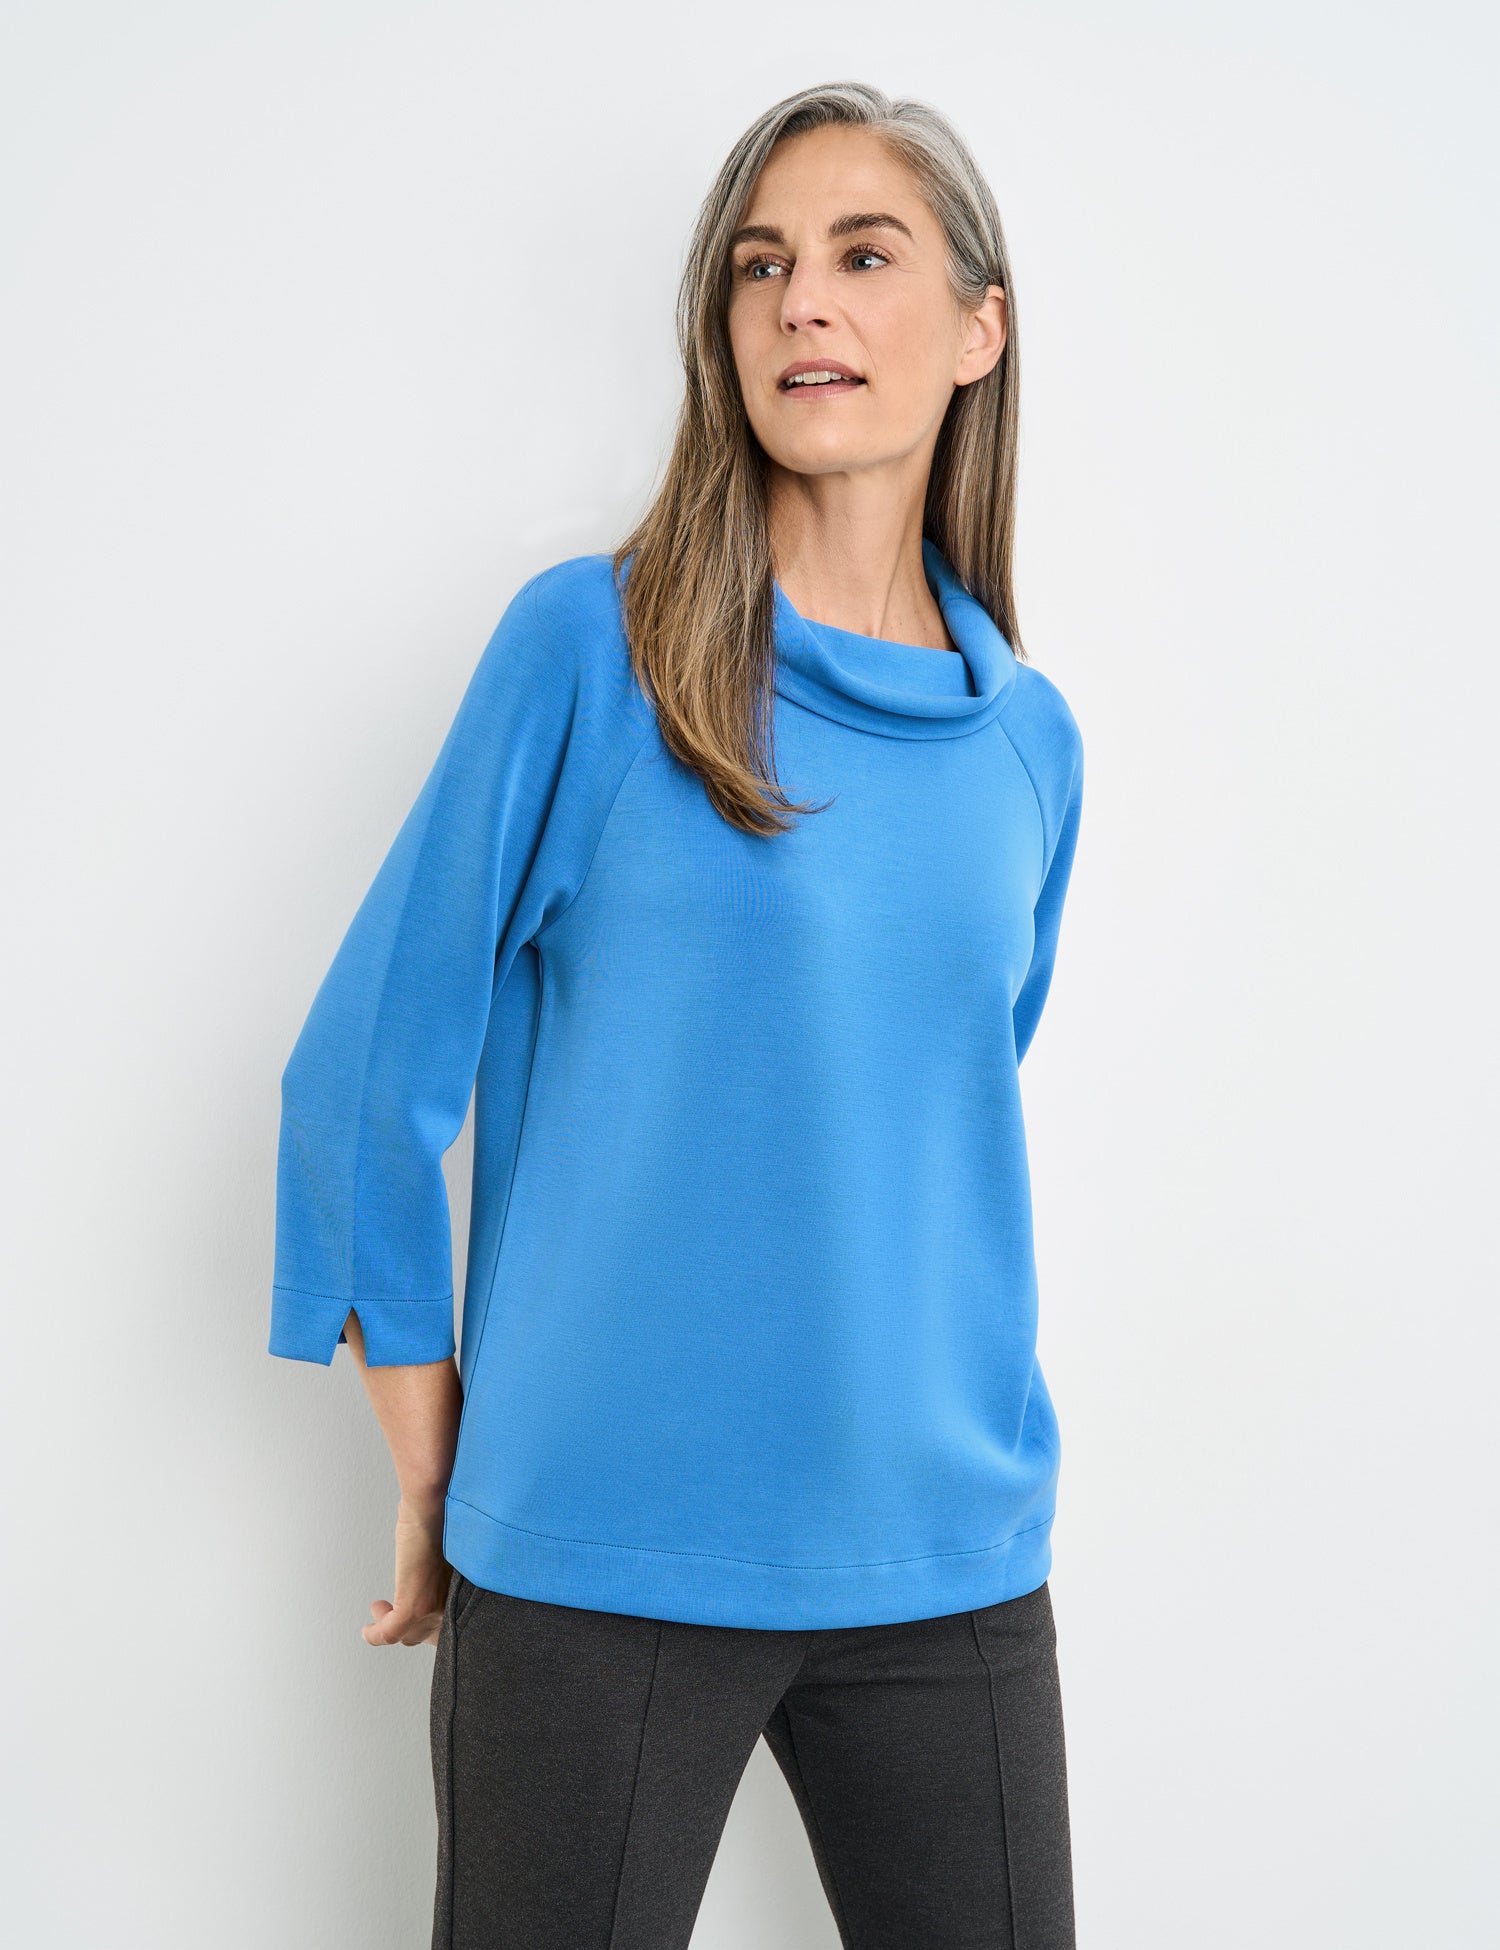 Gerry Weber Soft Cowl Neck Top with 3/4 Sleeves